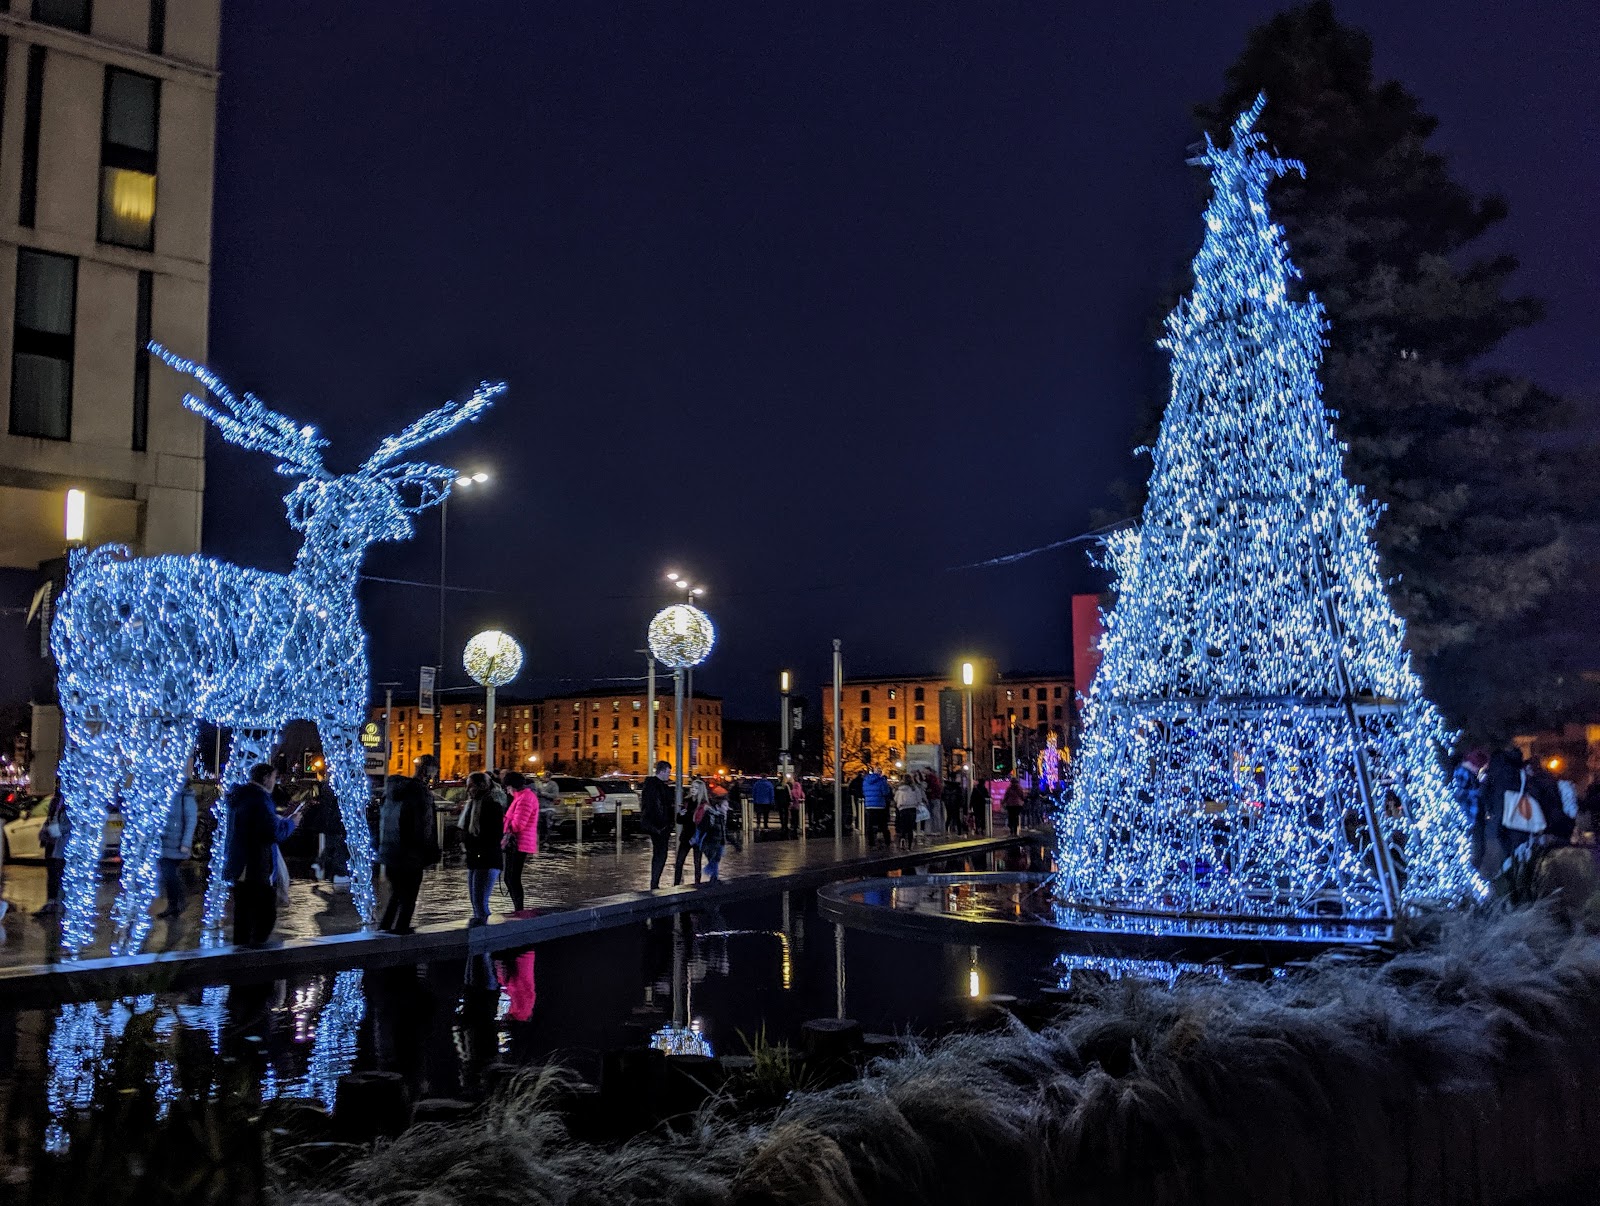 A Guide to Visiting Liverpool Christmas Markets & Lights  - Reindeer Decorations